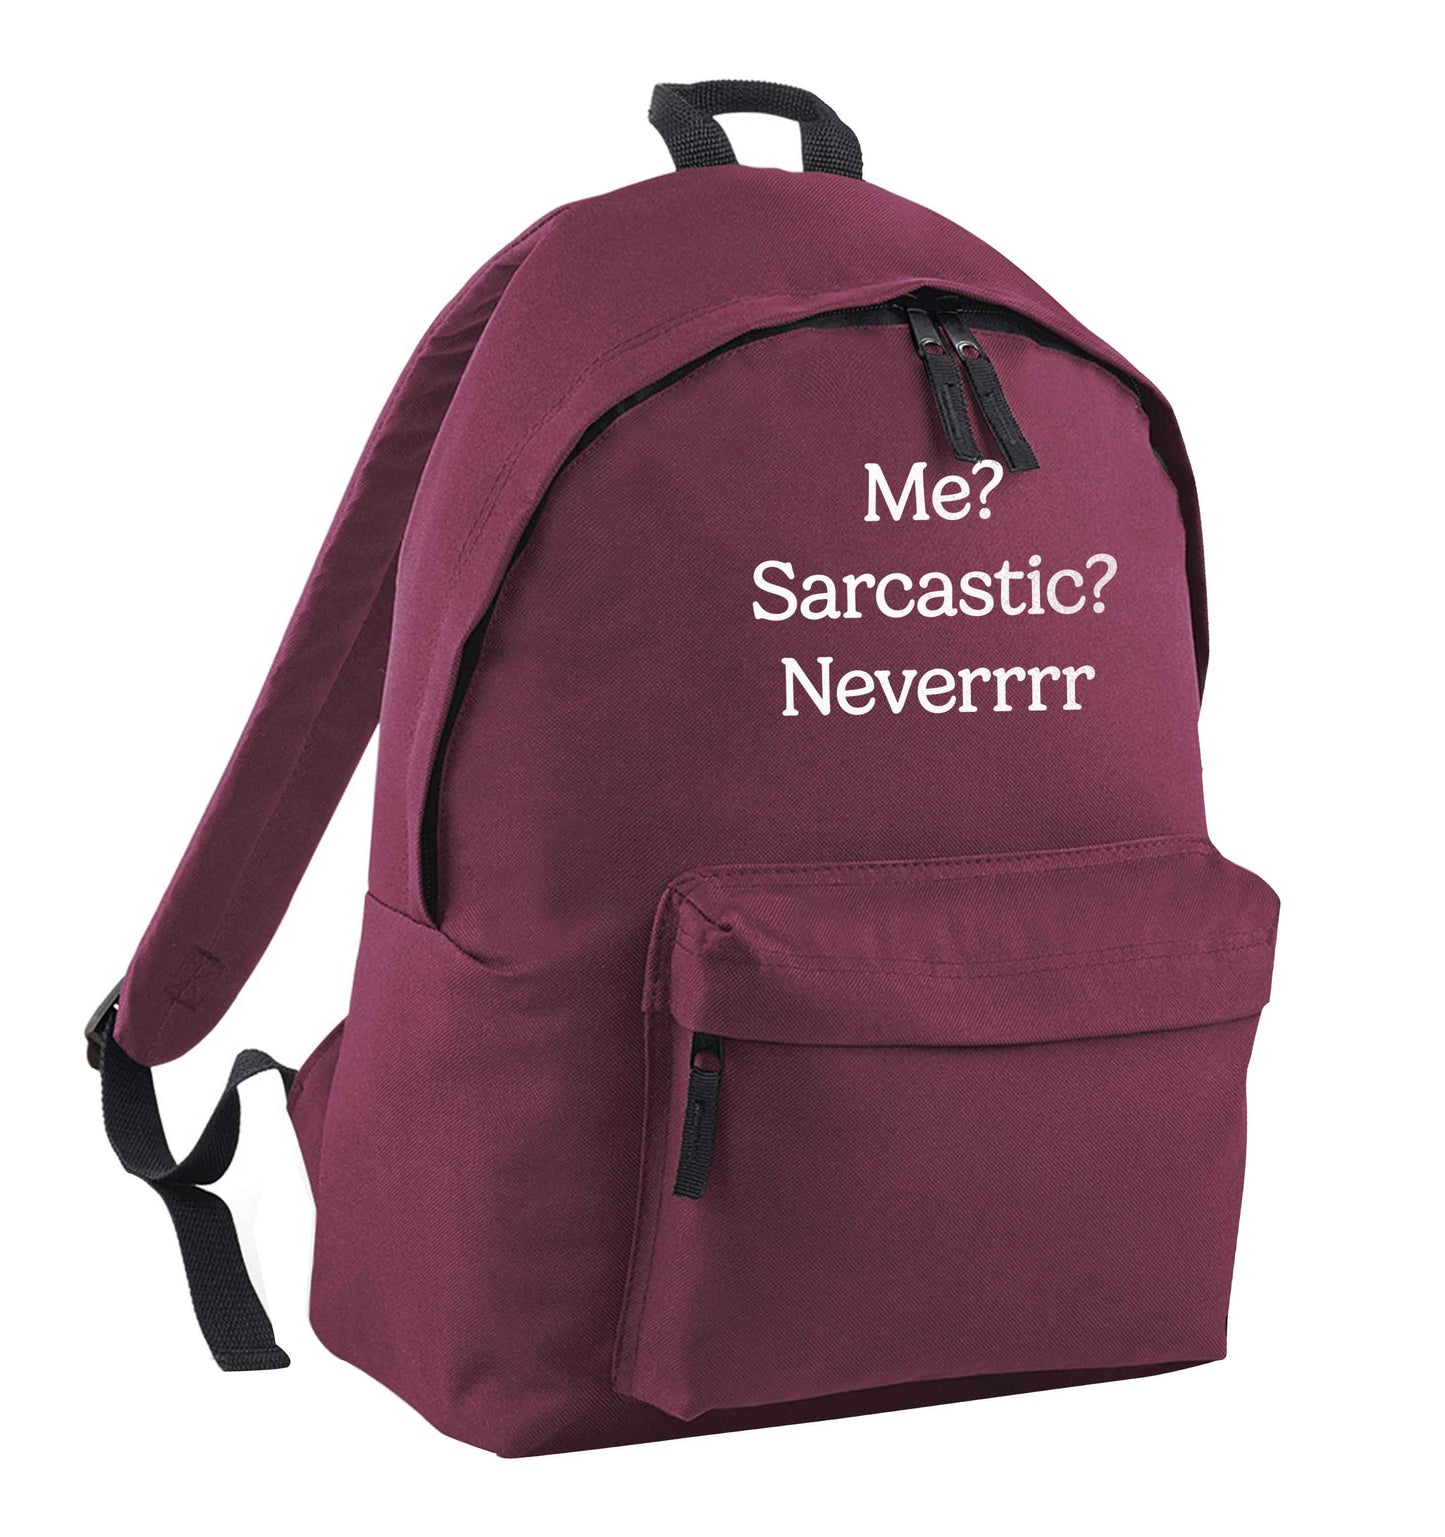 Me? sarcastic? never maroon children's backpack